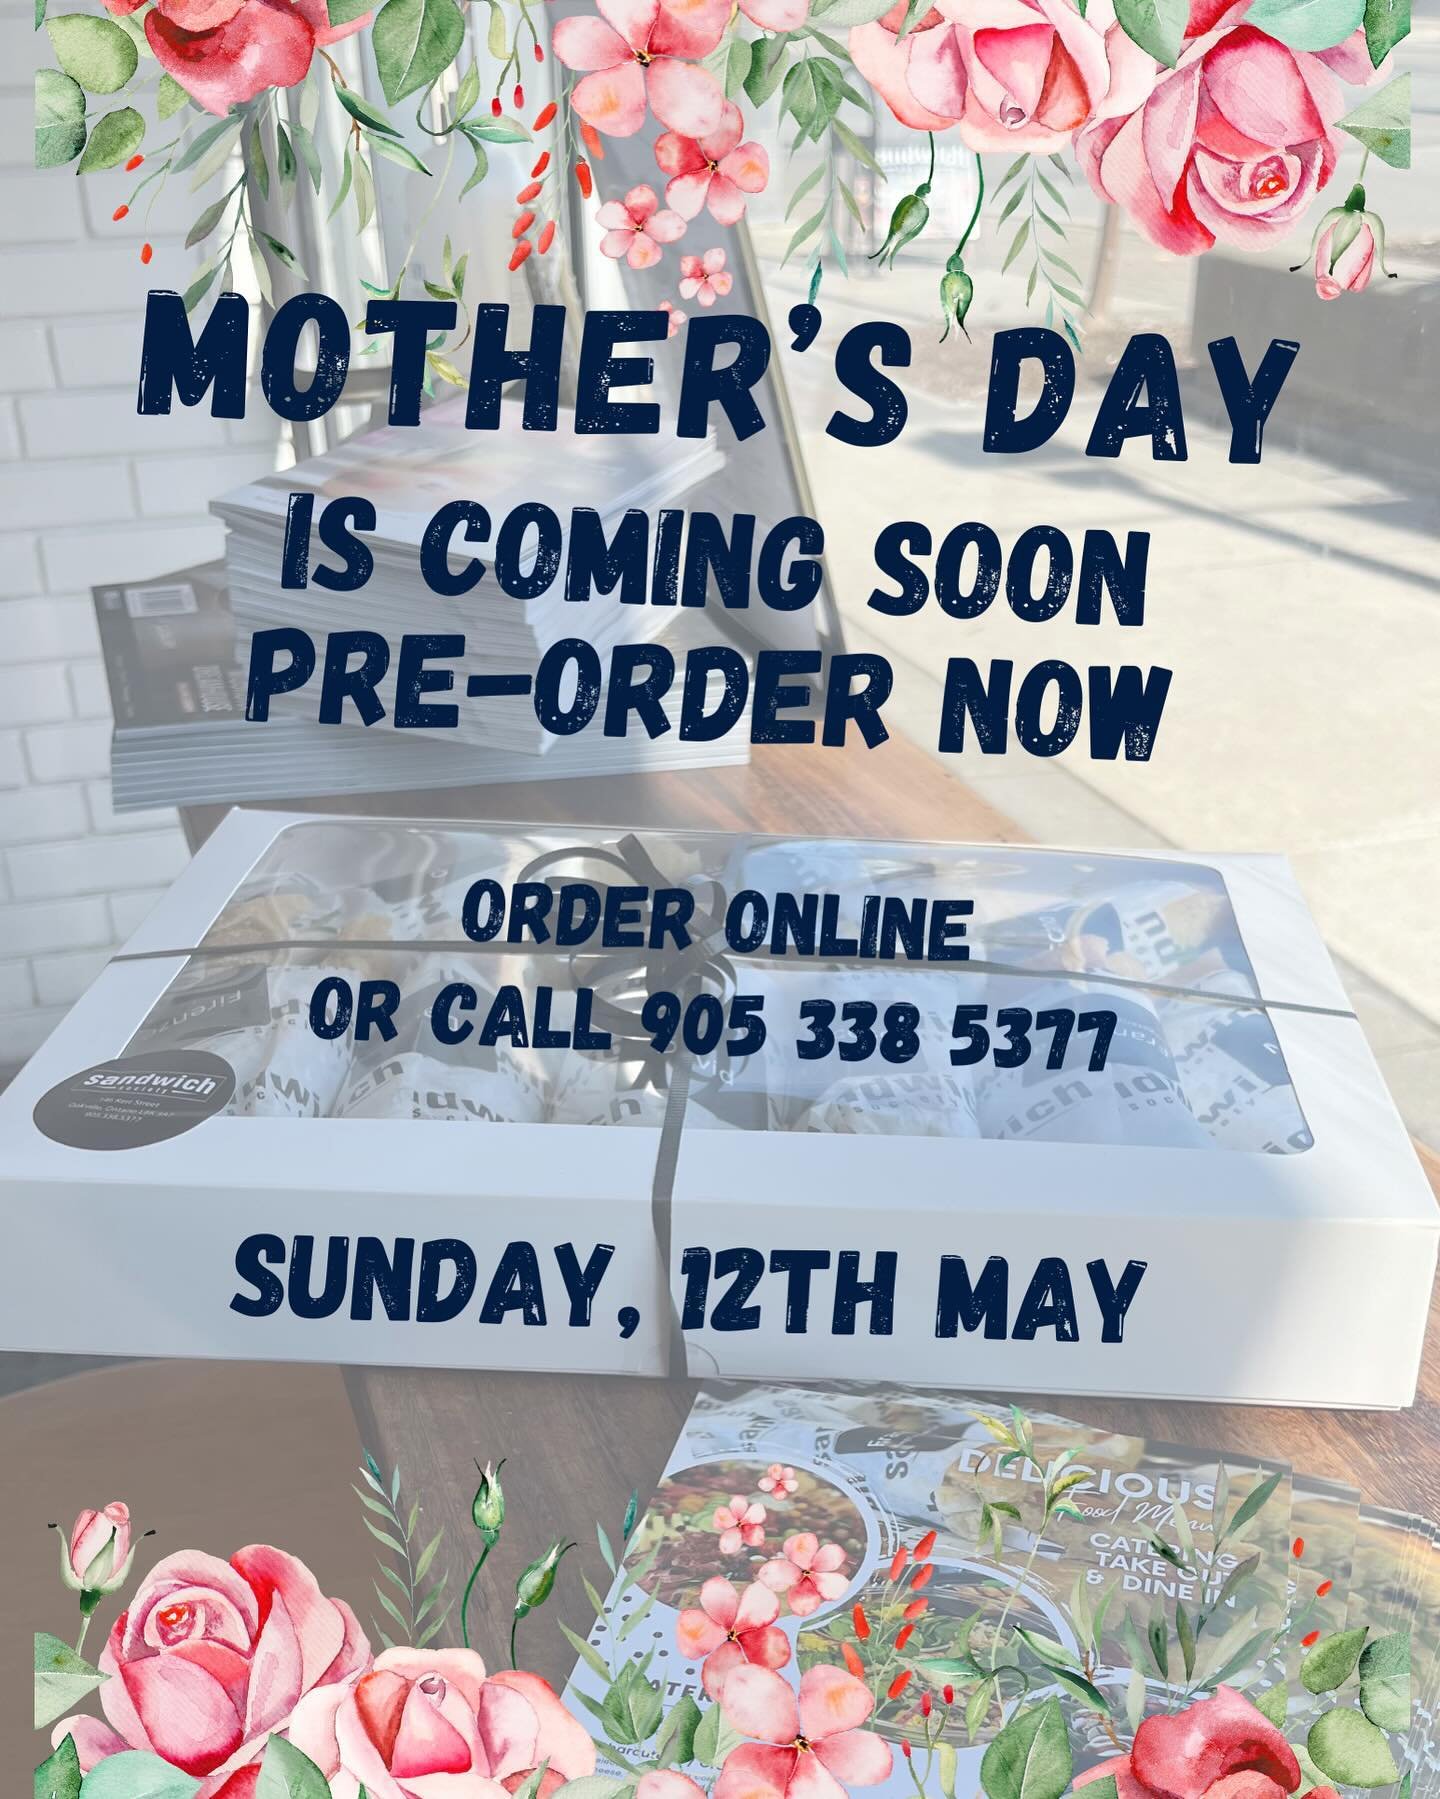 🌹 Mother&rsquo;s Day is coming soon 🌹 
We&rsquo;re already super excited &amp; highly recommend to #pre-order your favorite menu items early! What are you thinking of ordering?

💻 Order Online via www.sandwichsociety.ca

📞Call us to inquire @ 905